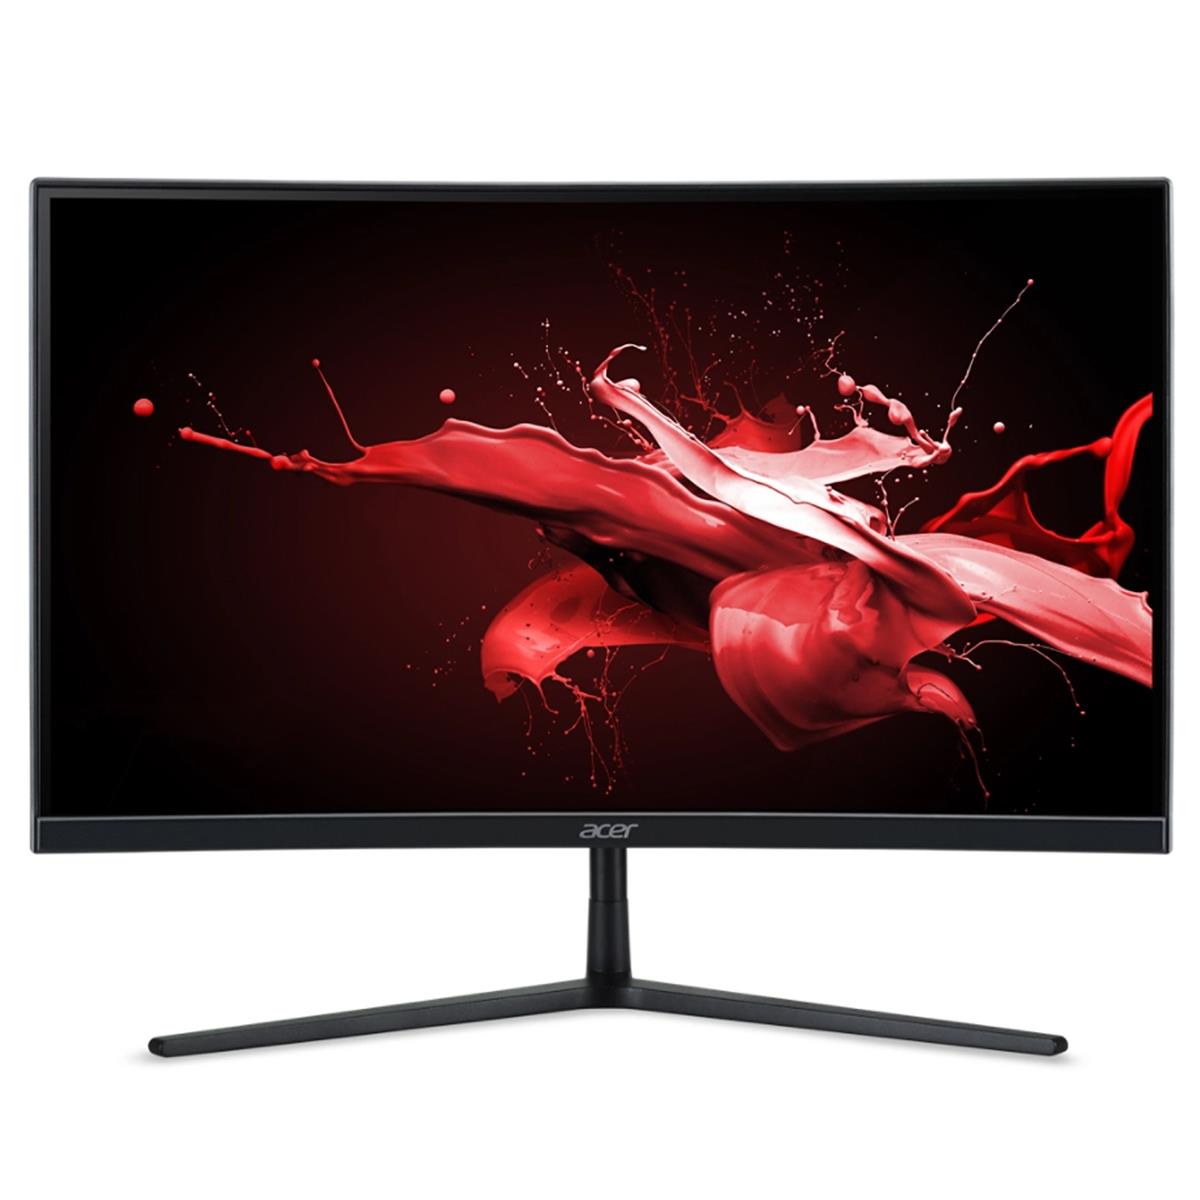 Photos - Monitor Acer EI242QR Mbiipx 23.6" 16:9 Full HD 170Hz Curved VA LED HDR Monito 